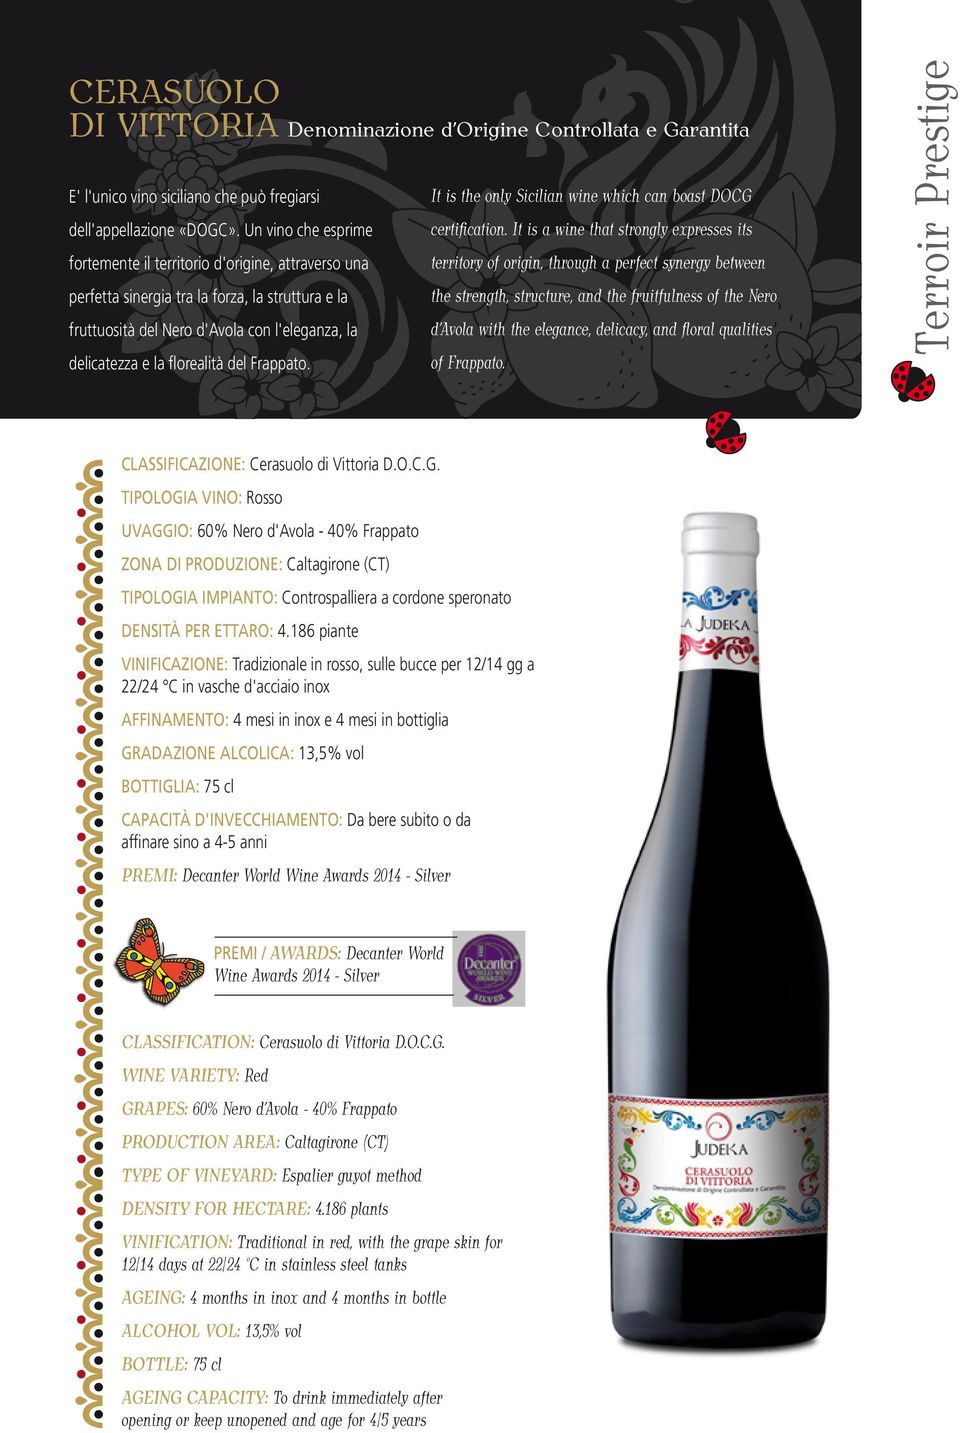 del Frappato. It is the only Sicilian wine which can boast DOCG certification.